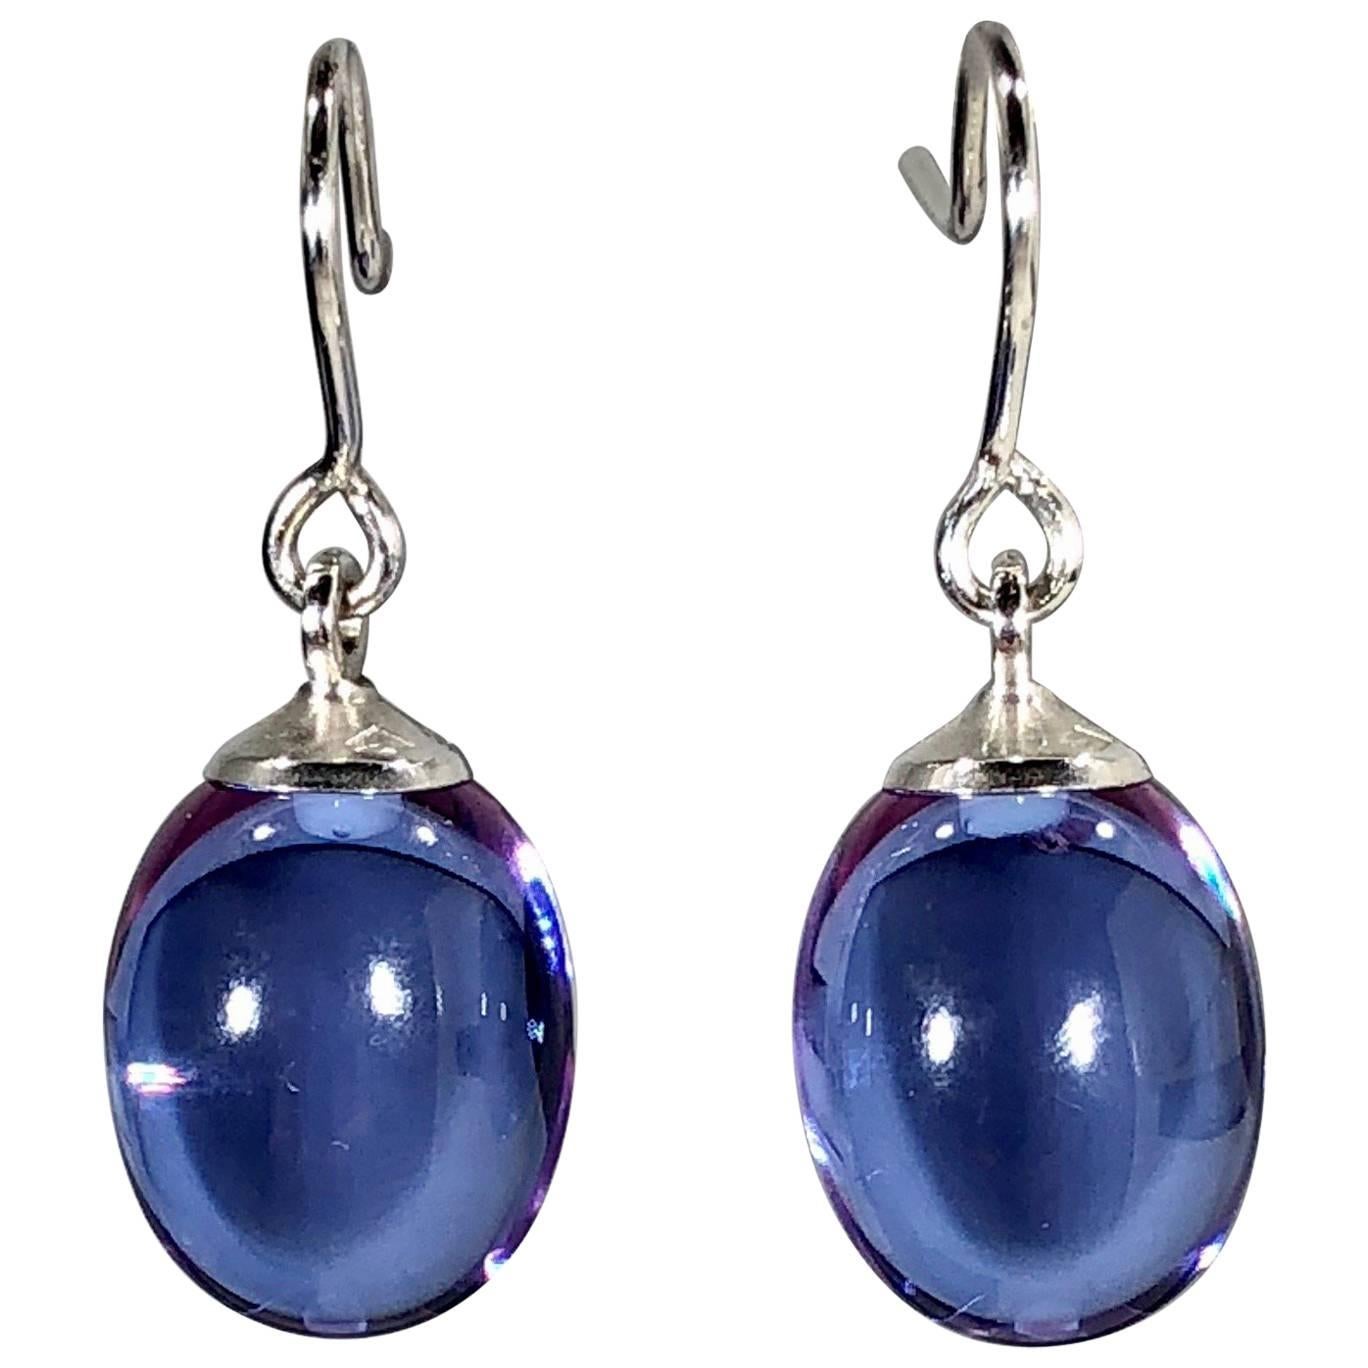 Baccarat Crystal and Sterling Silver Blue Irridescent Drop Earrings